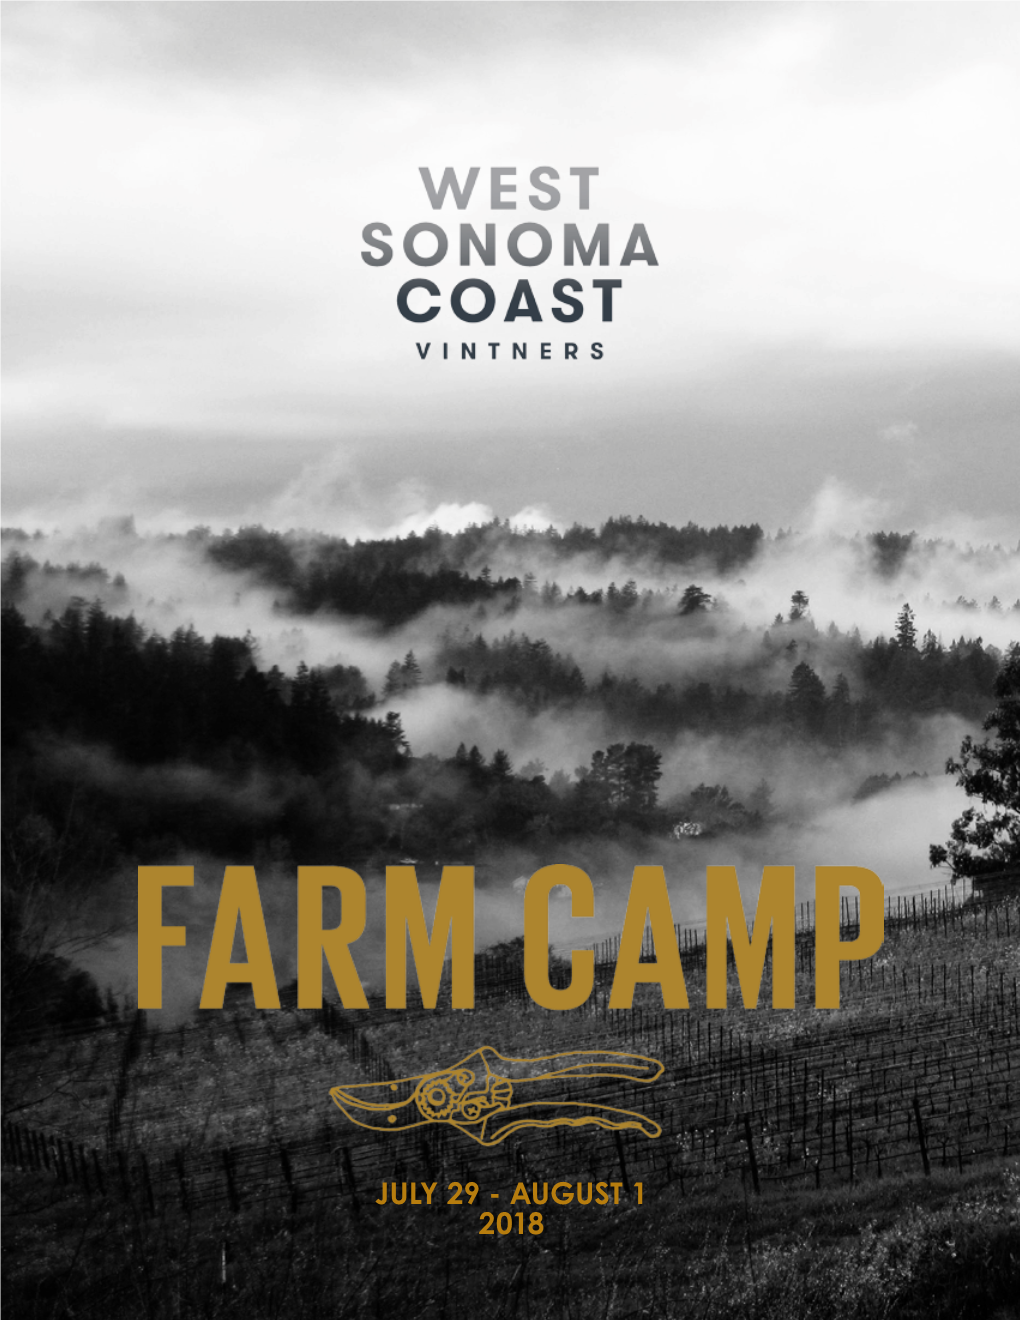 August 1 2018 #Farmcamp18 #Westsonomacoast Table of Contents